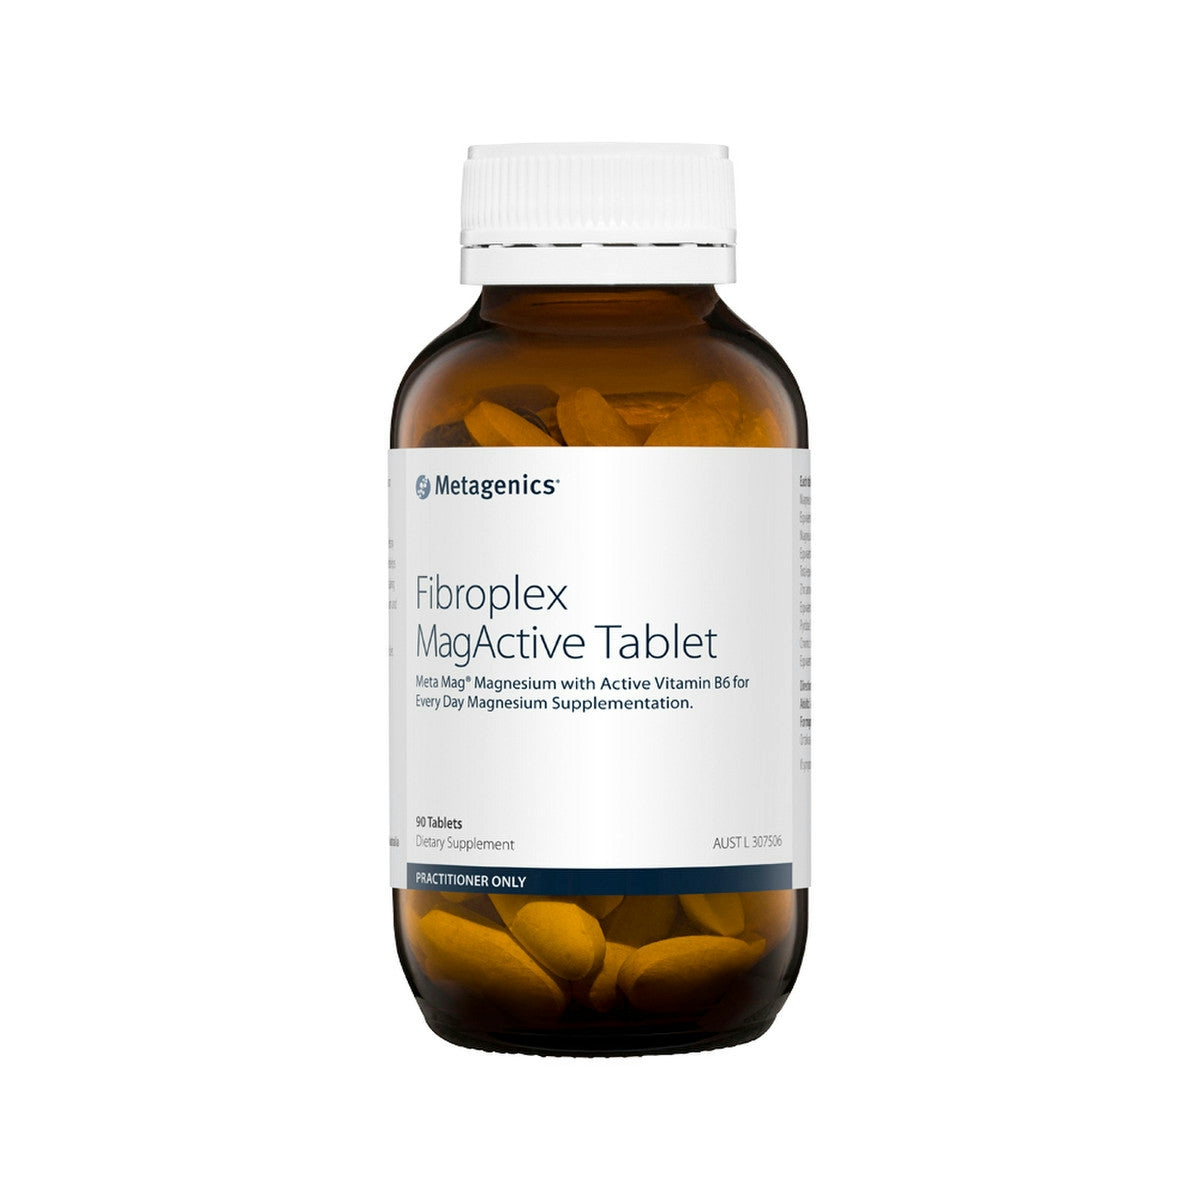 image of Metagenics Fibroplex MagActive Tablet 90t on white background